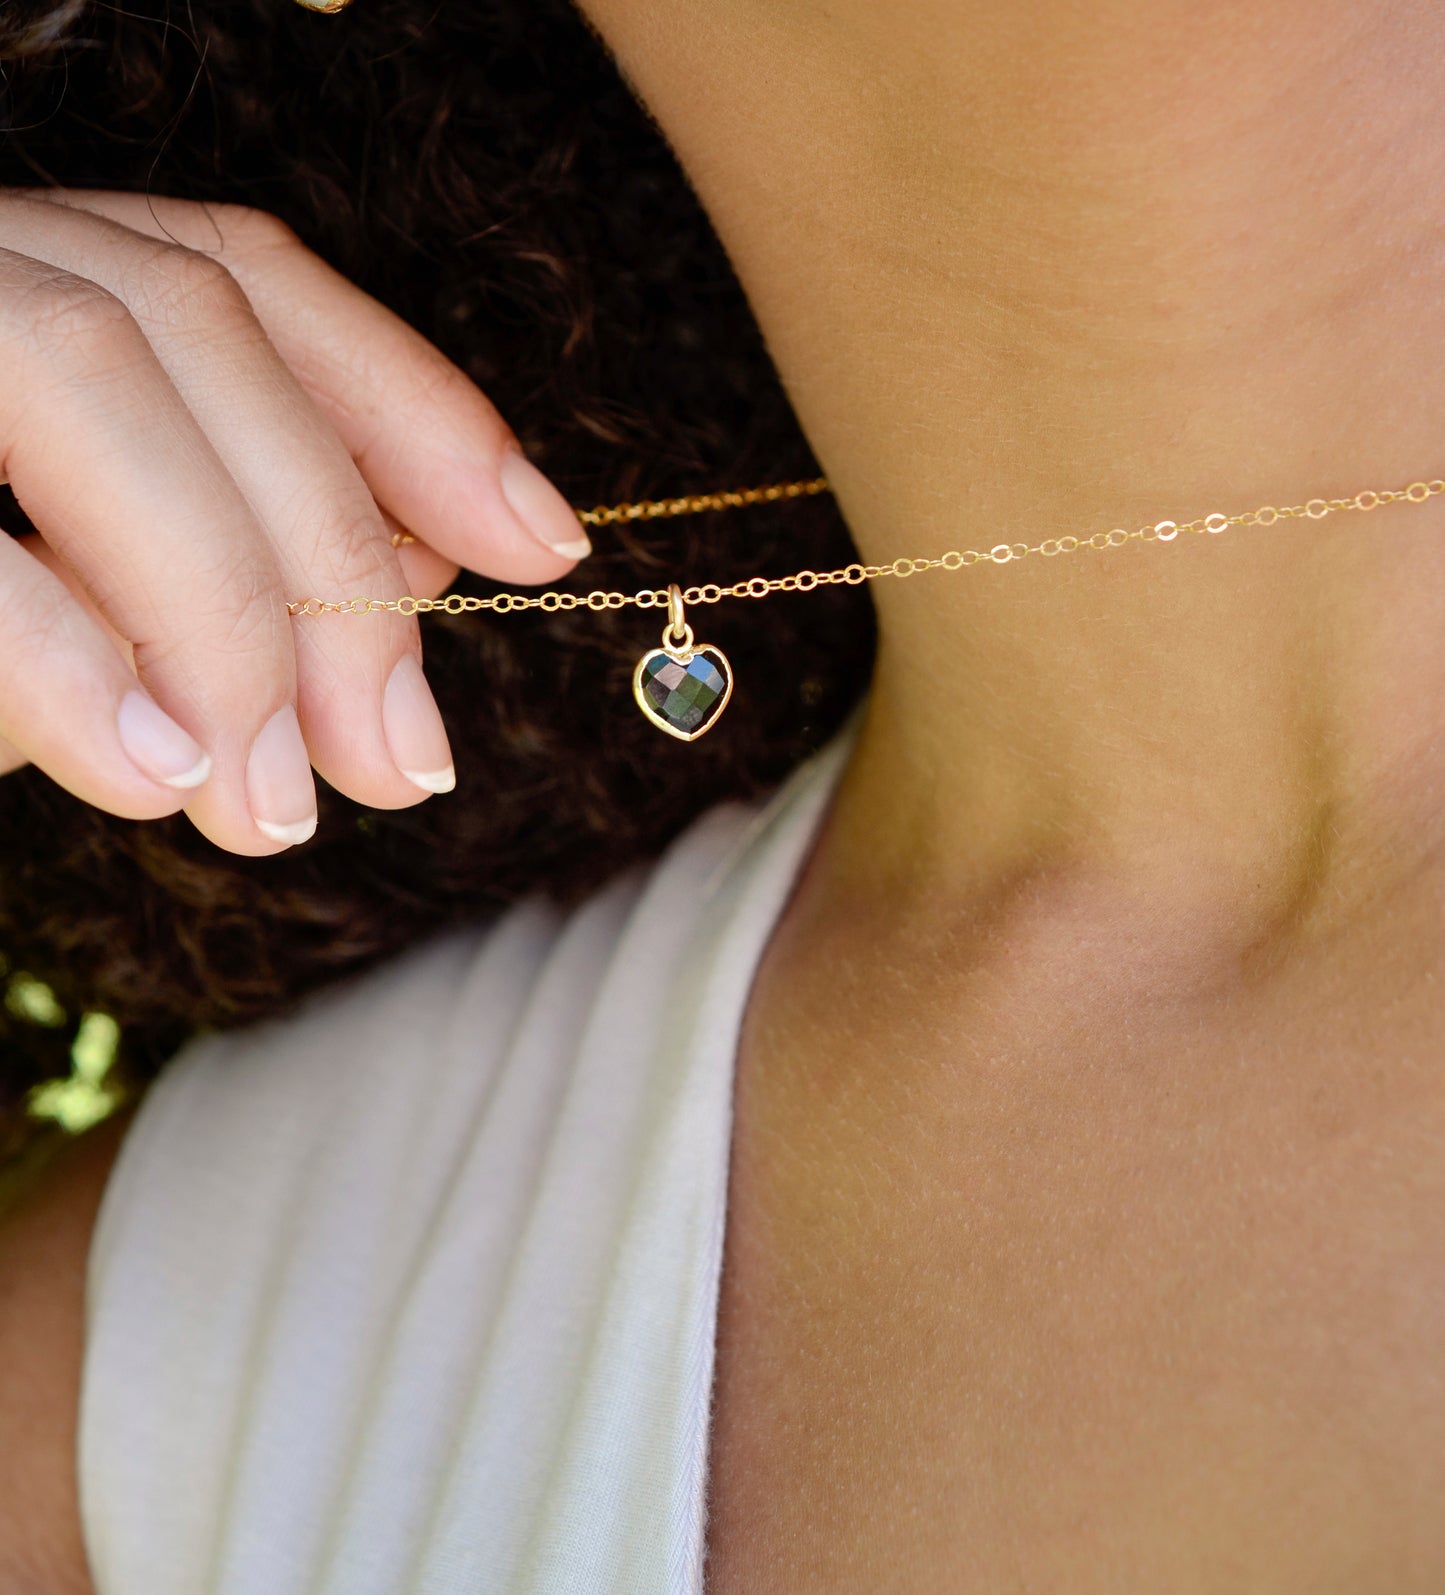 Black Onyx gold heart necklace. A black stone heart bezeled in gold is suspended from a 14k gold filled chain.